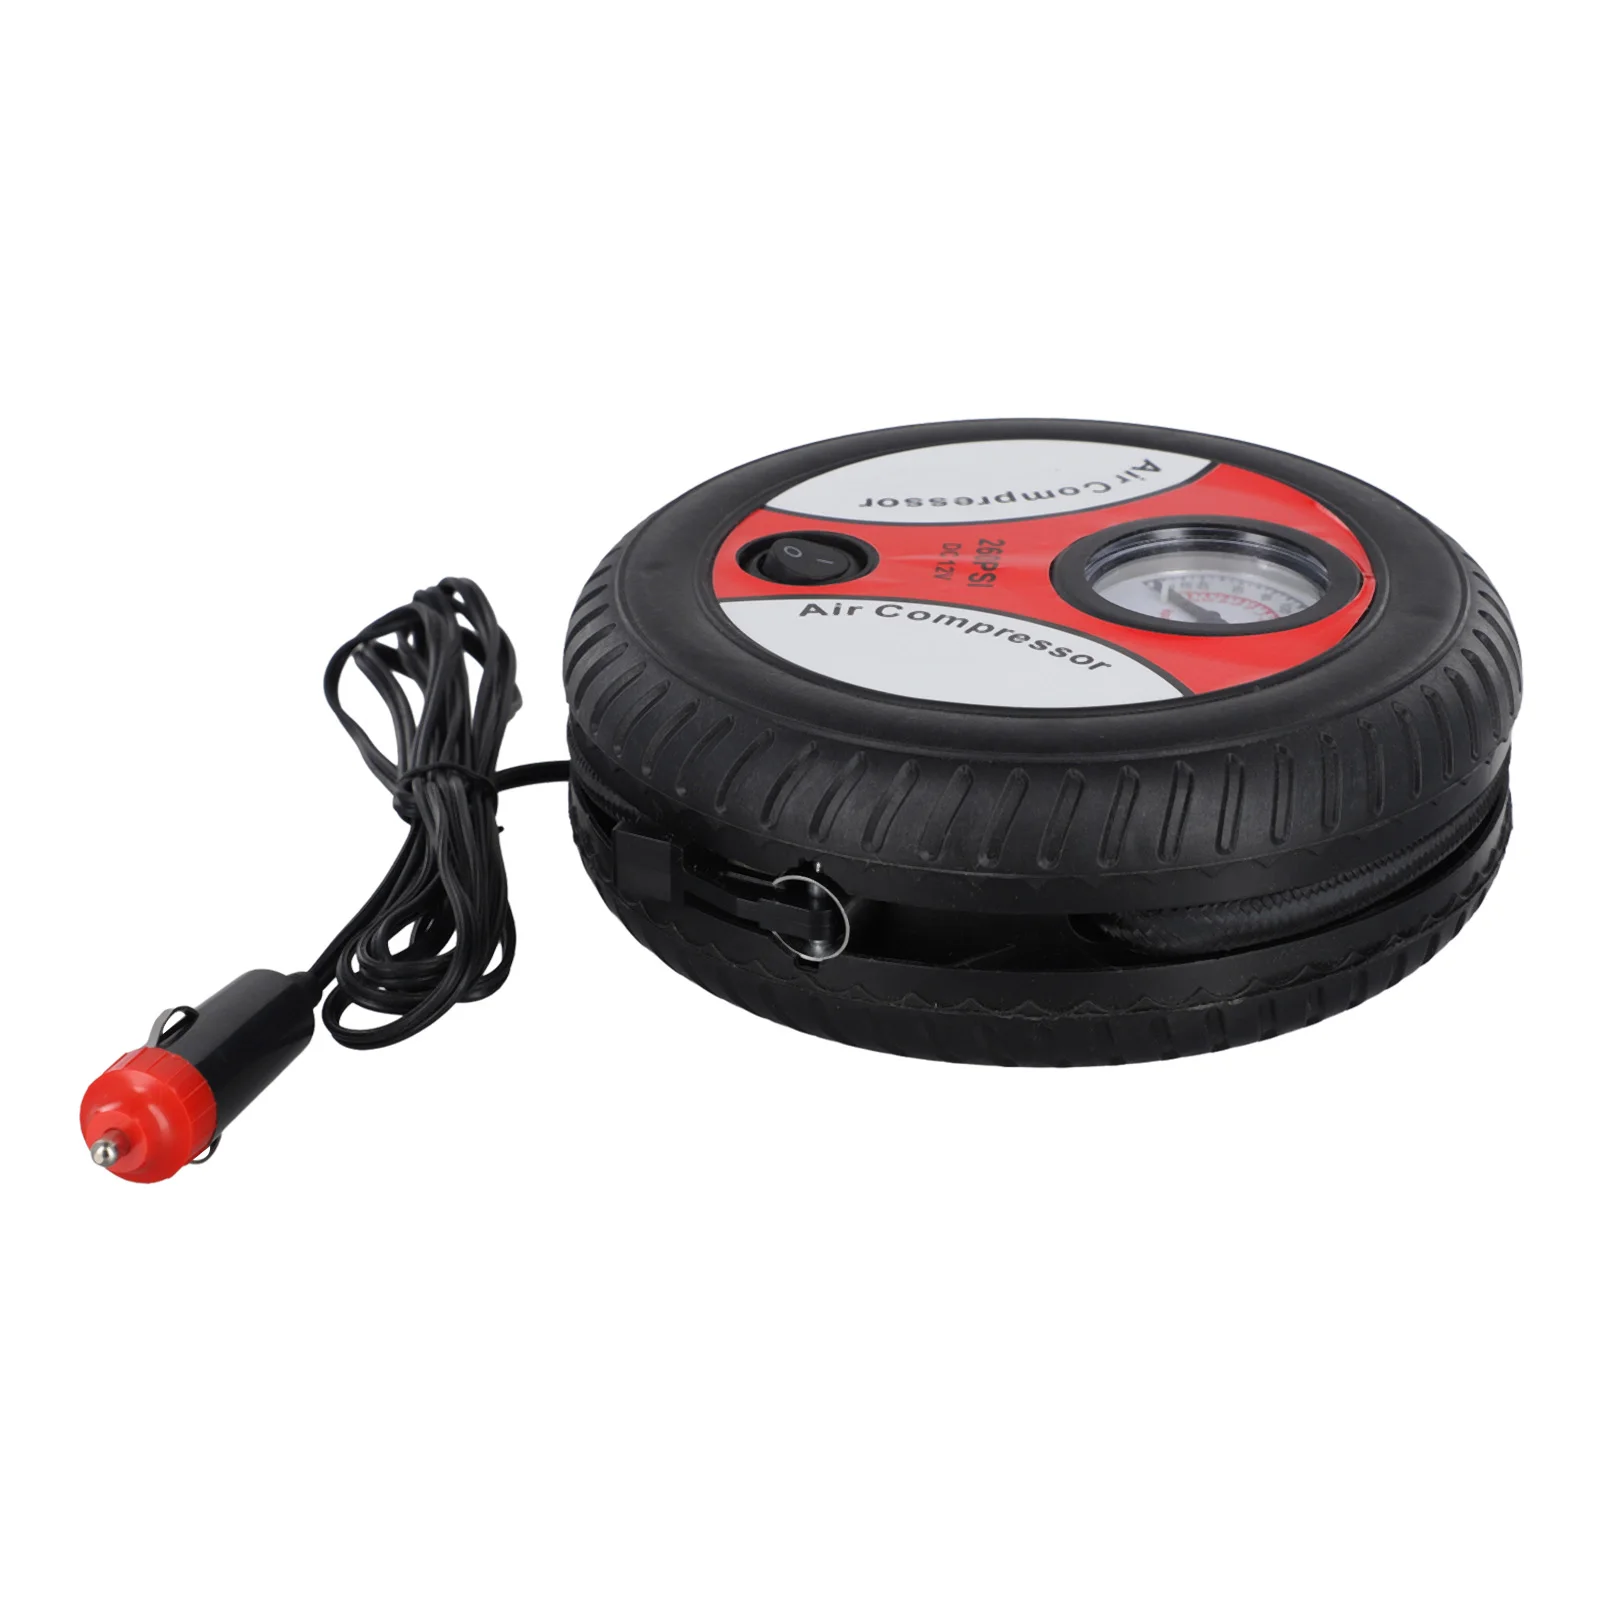 

Reliable 12V Portable Air Compressor Wheel Anti corrosion Suitable for Inflating Car Tires Rubber Floats 260 PSI